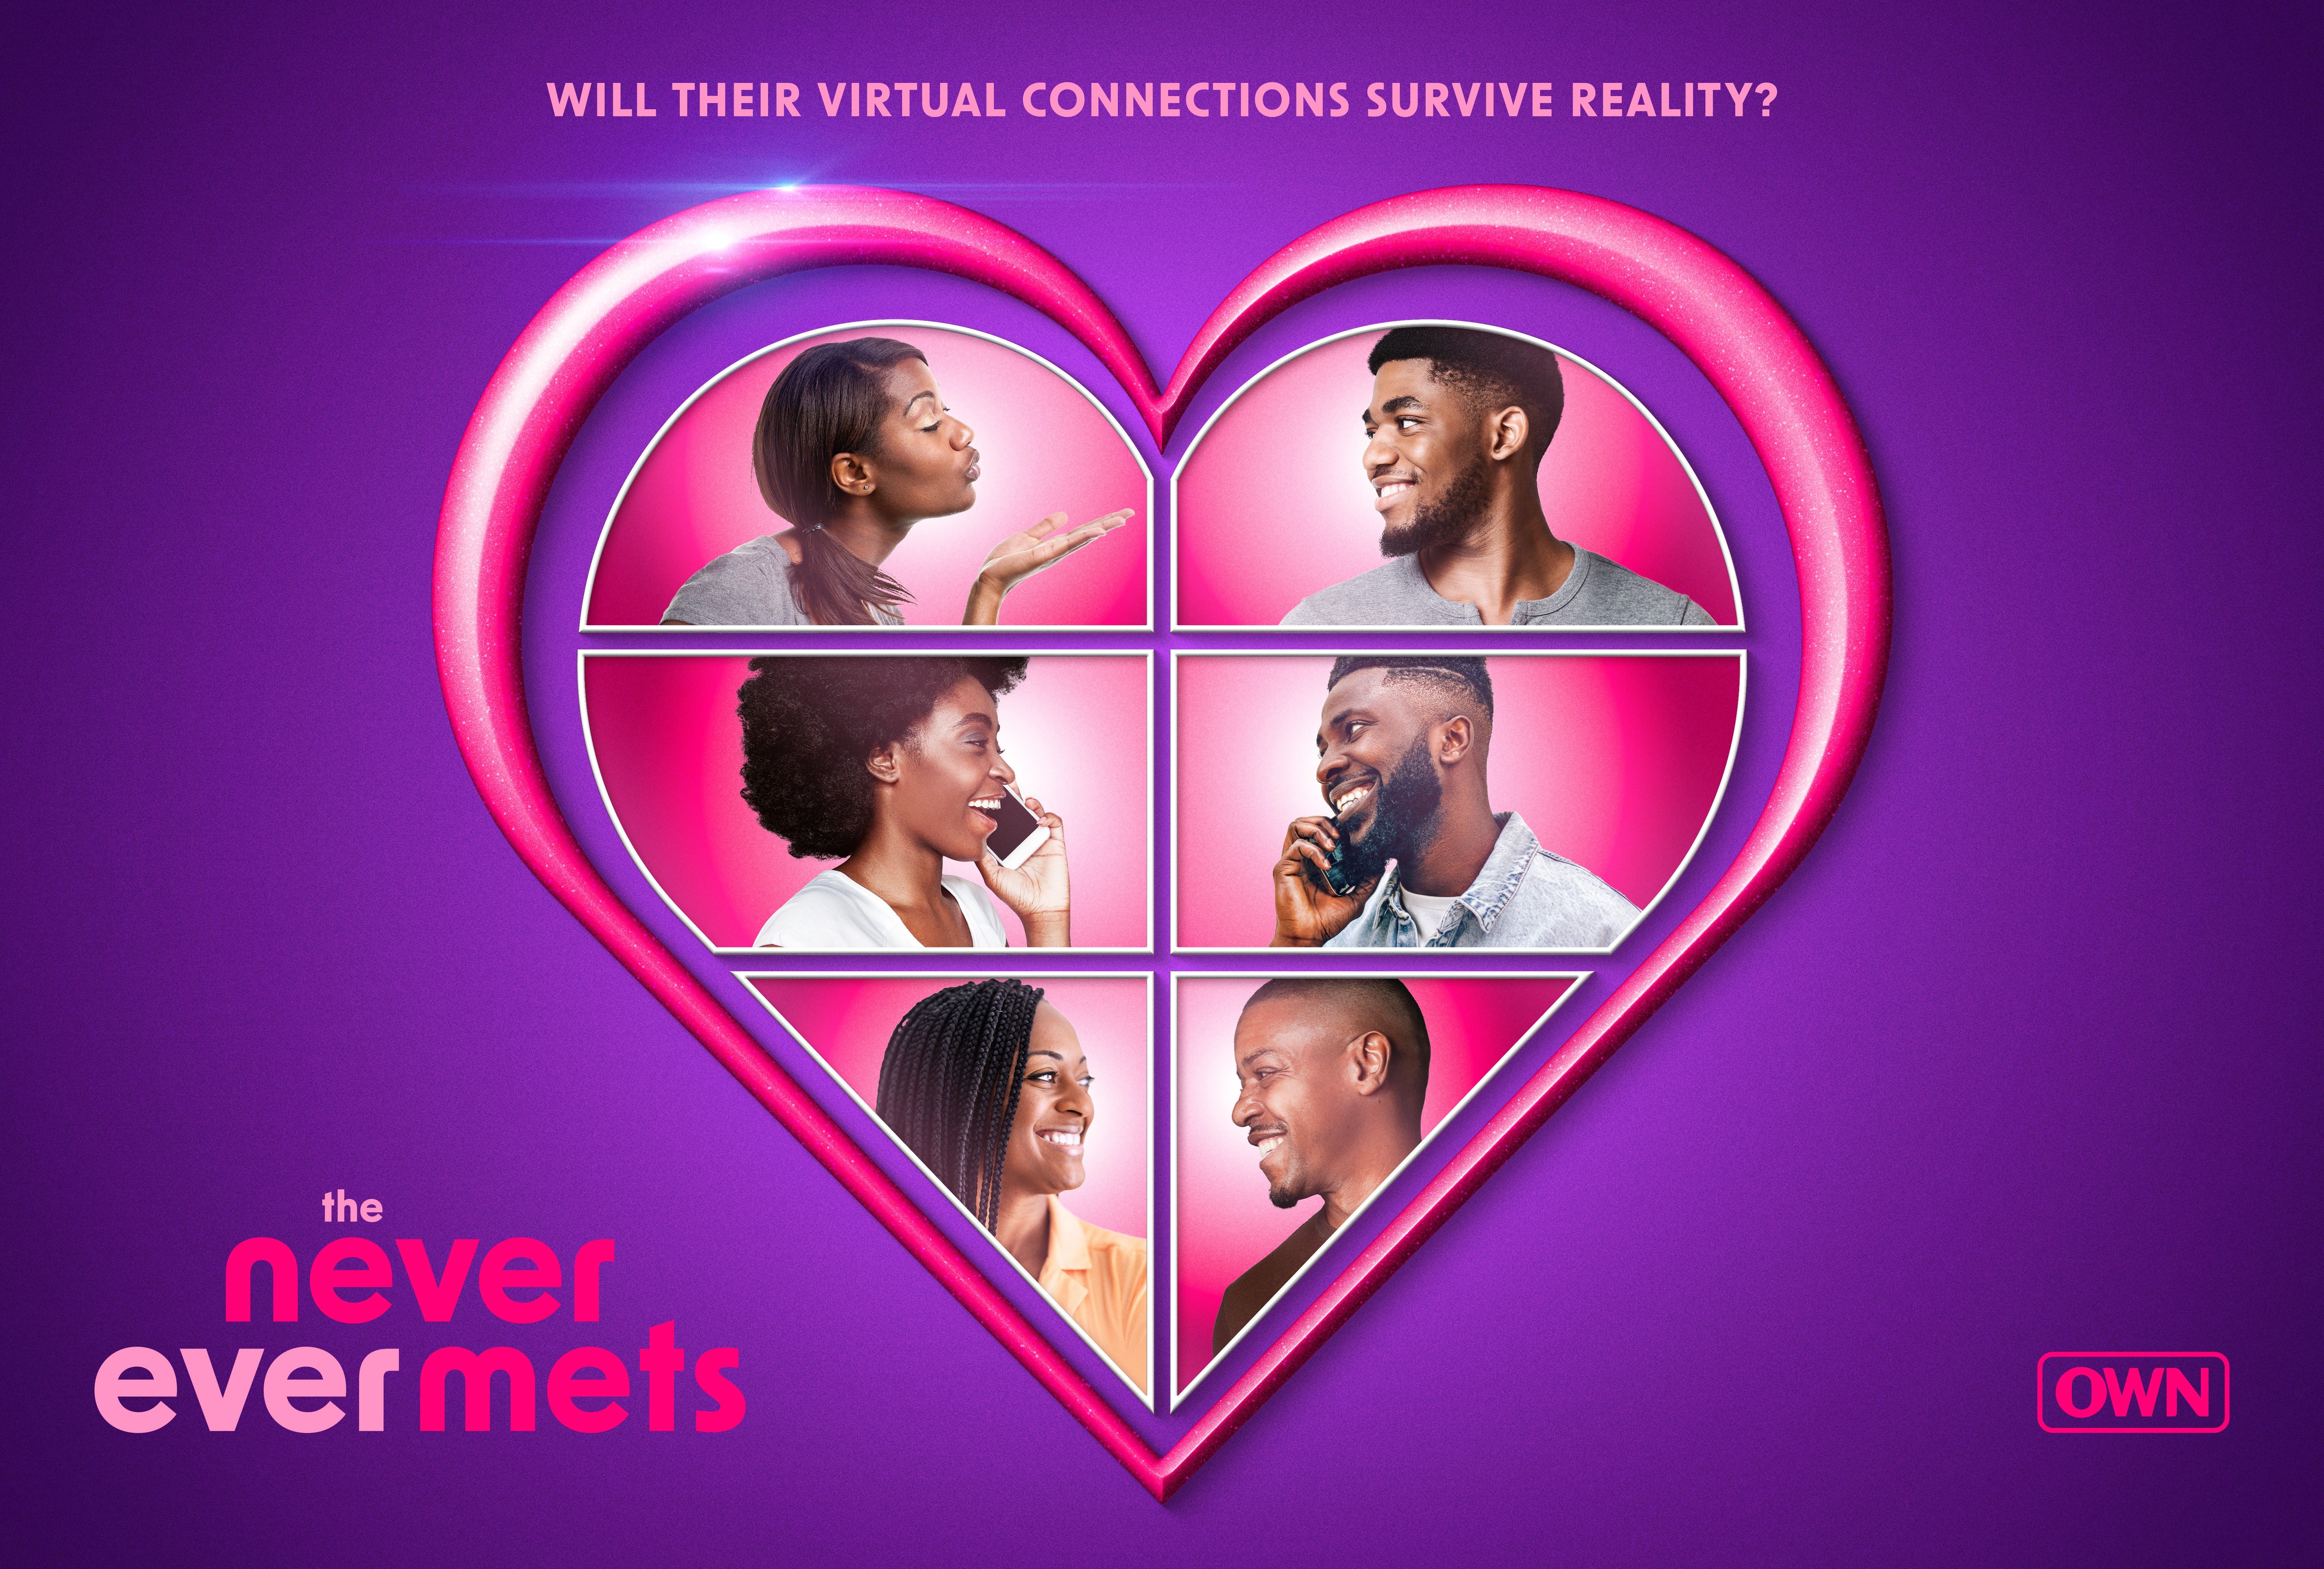 OWN’s ‘The Never Ever Mets’ Exclusive Clip: The Couples Judge Each Others’ Relationships